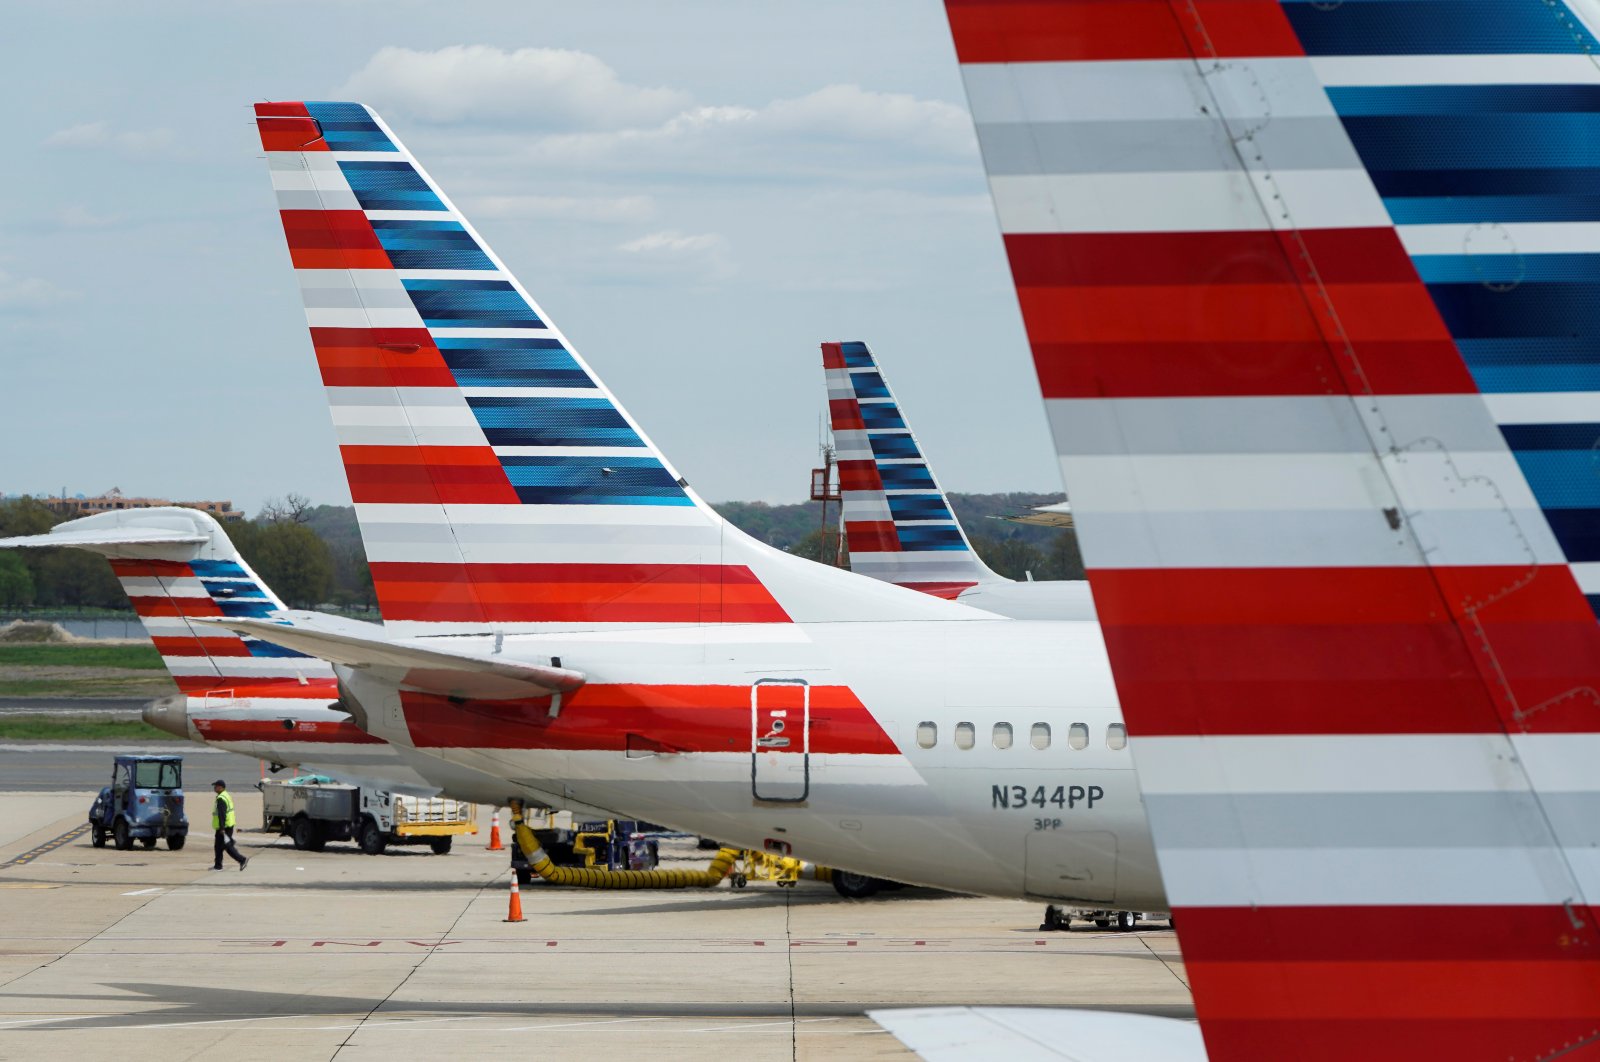 A member of a ground crew walks past American Airlines planes parked at the gate during the coronavirus outbreak at Ronald Reagan National Airport in Washington, U.S., April 5, 2020. (Reuters Photo)